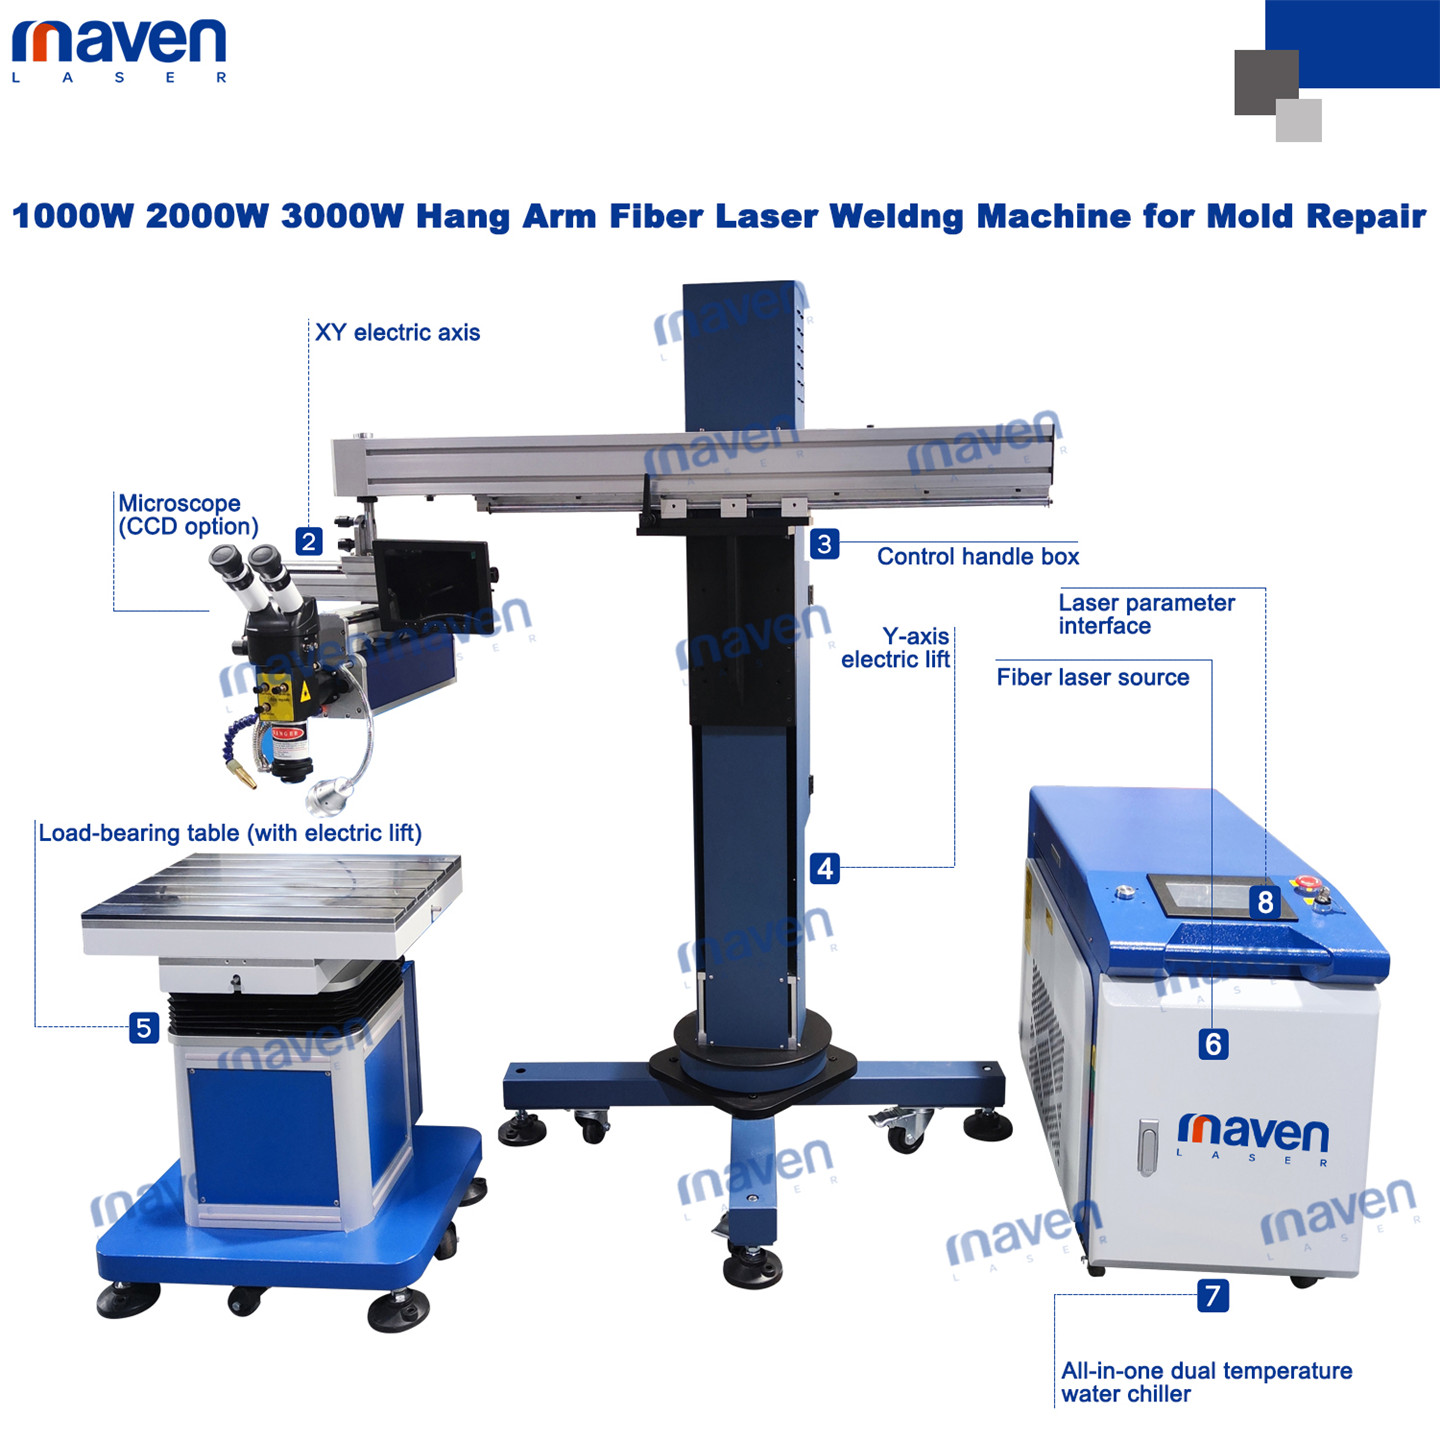 MavenLaser 1500W 2000W Cantilever Mold Laser Welder with Lifter Arm for Precision Mold (12)